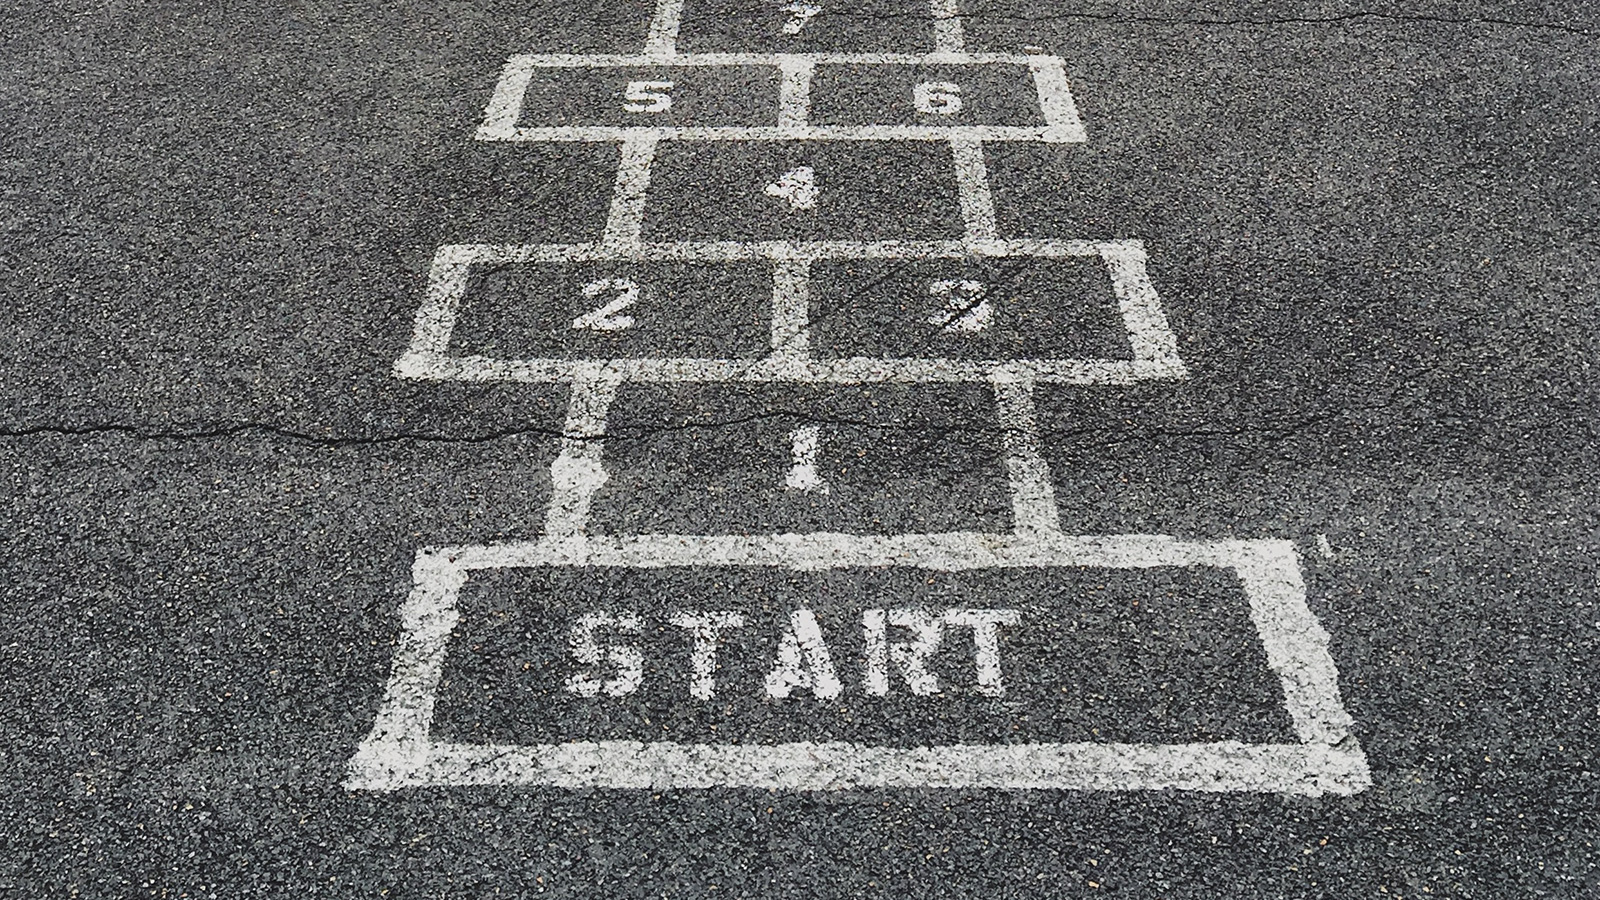 hop scotch painted on tarmac with a start box